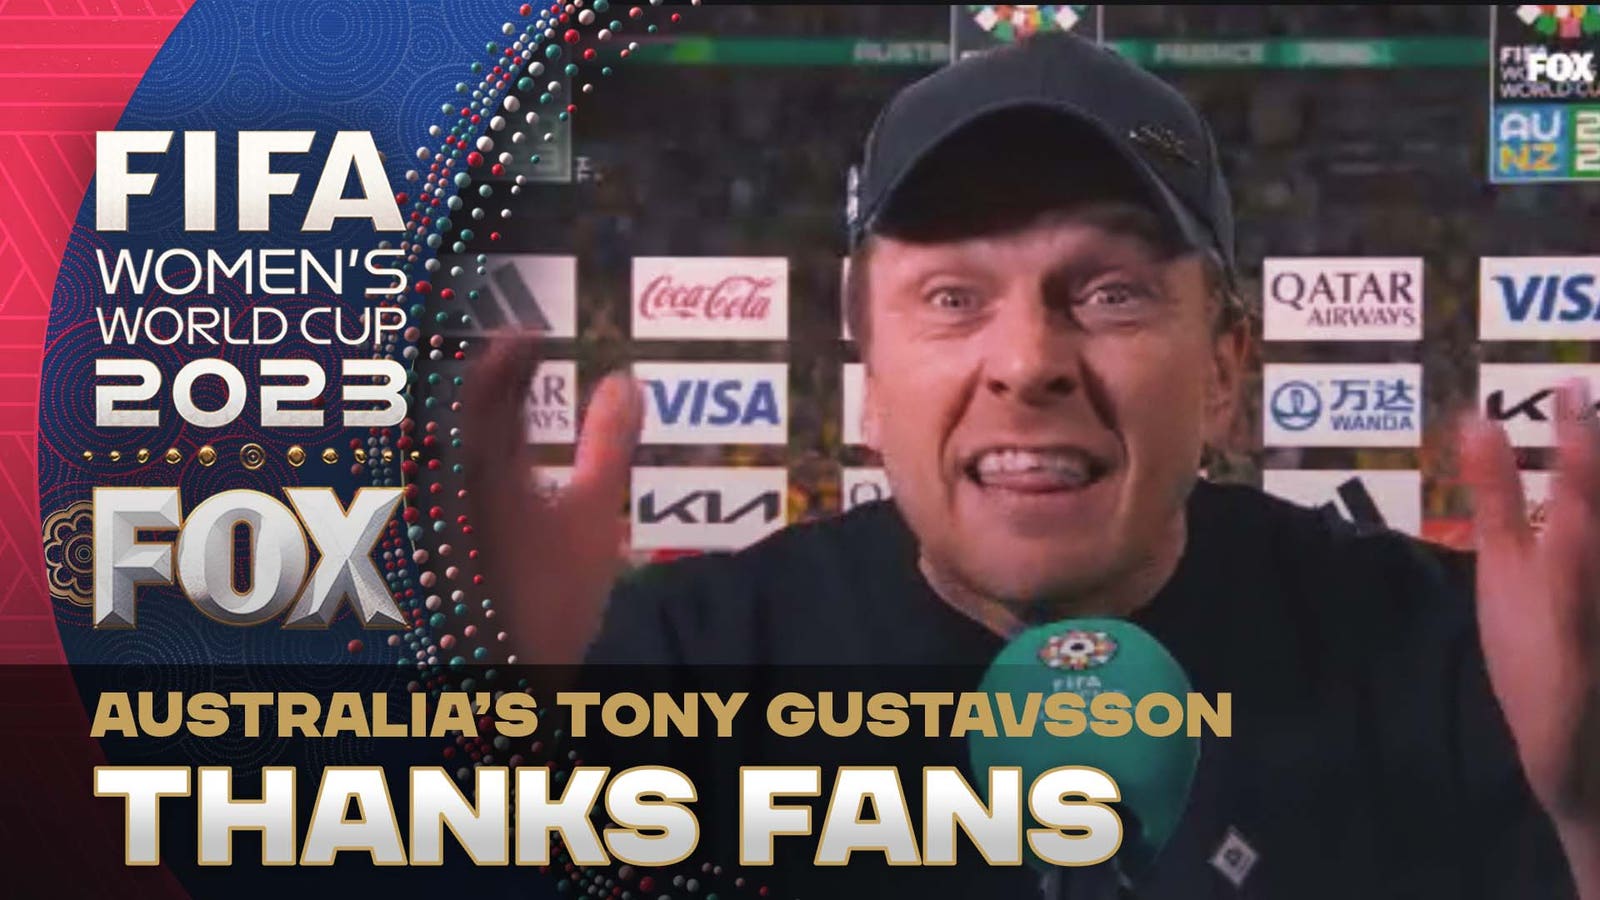 'You are a part of this win' - Australia HC Tony Gustavsson thanks fans after defeating France in PKs